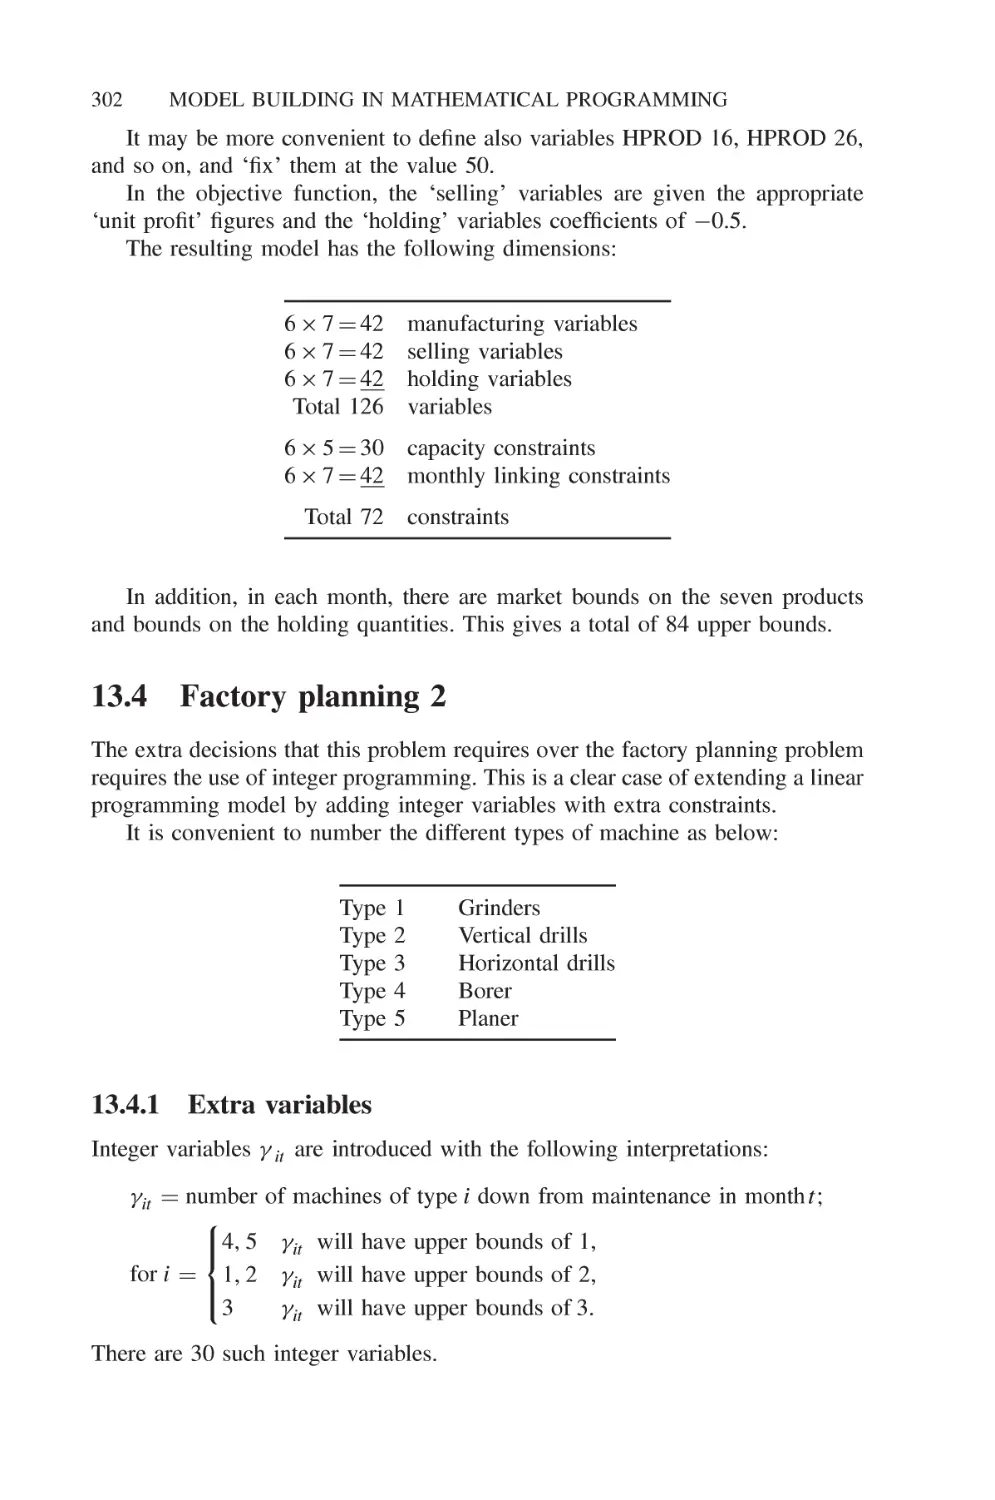 13.4 Factory planning 2